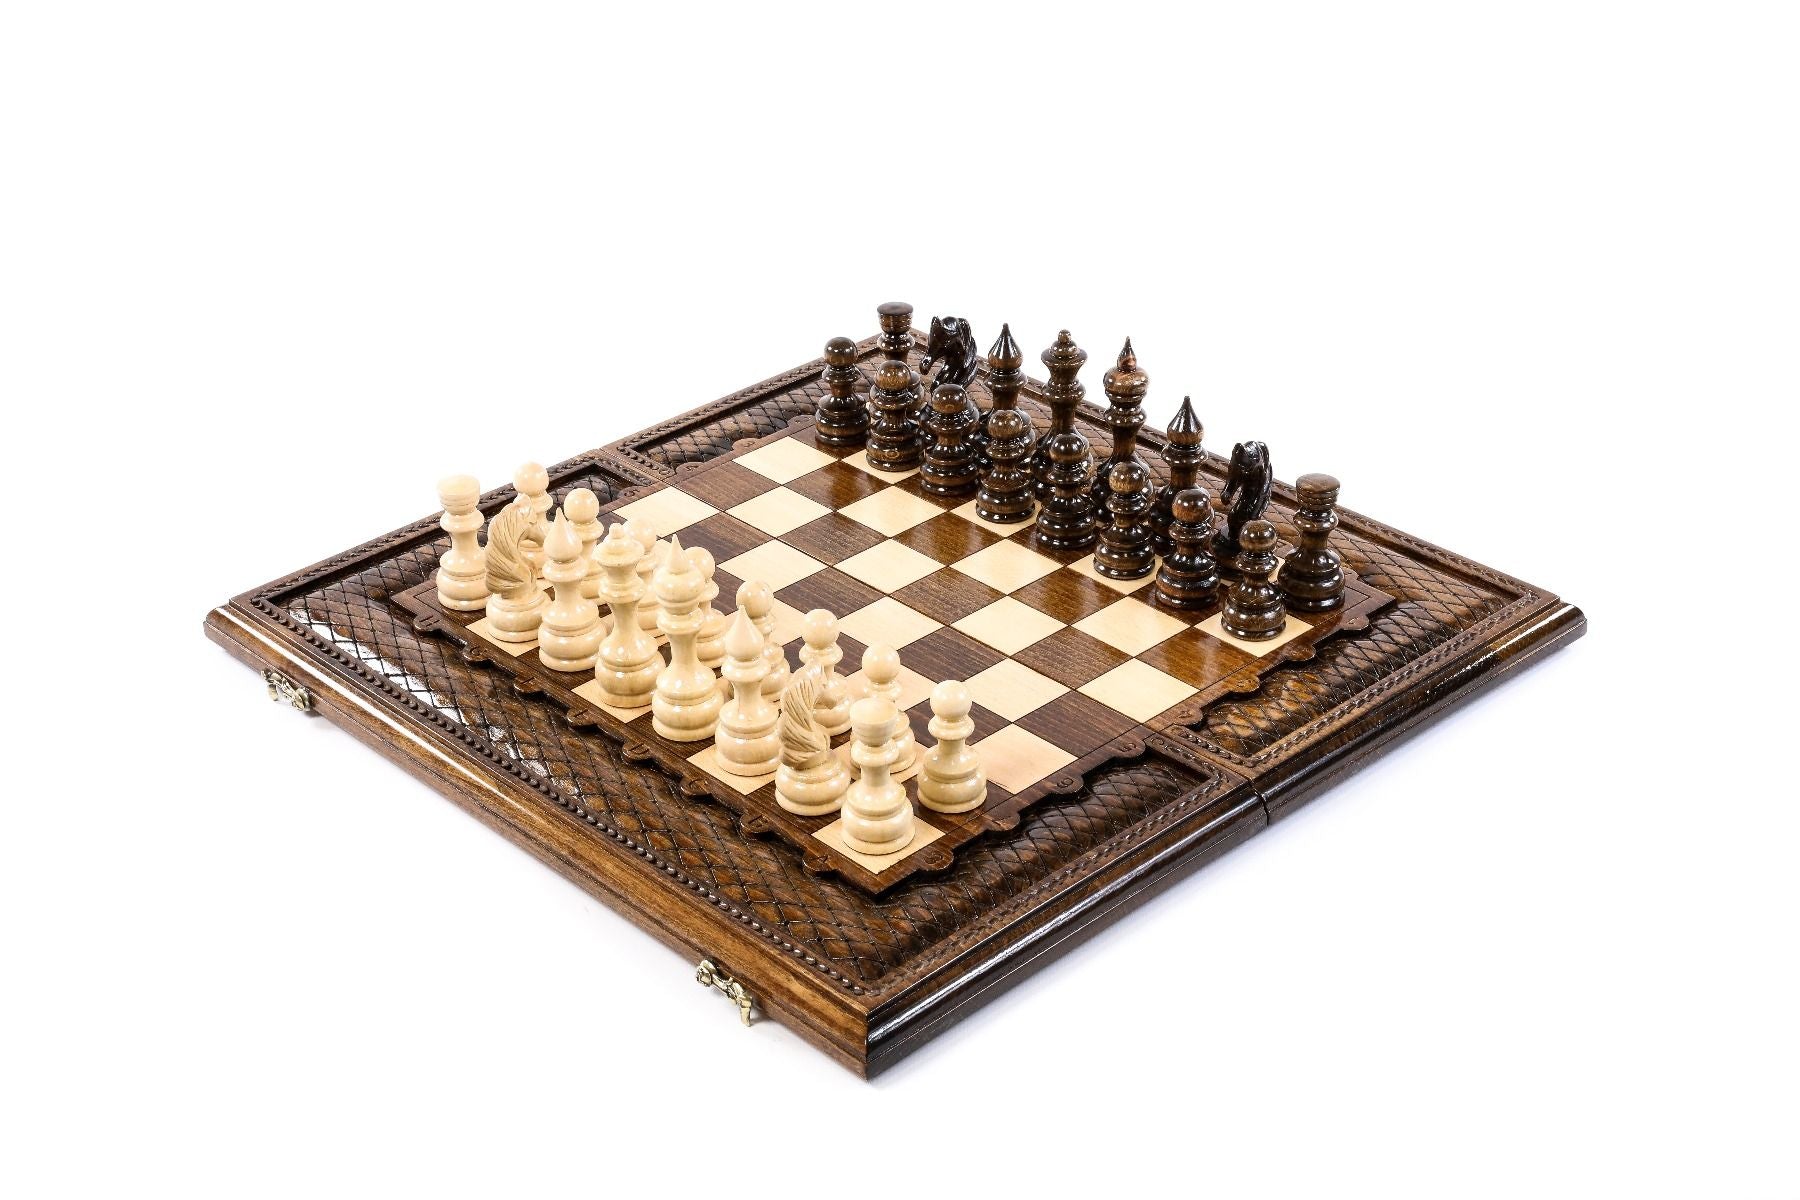 Carved Chess Set with Rhombus Design